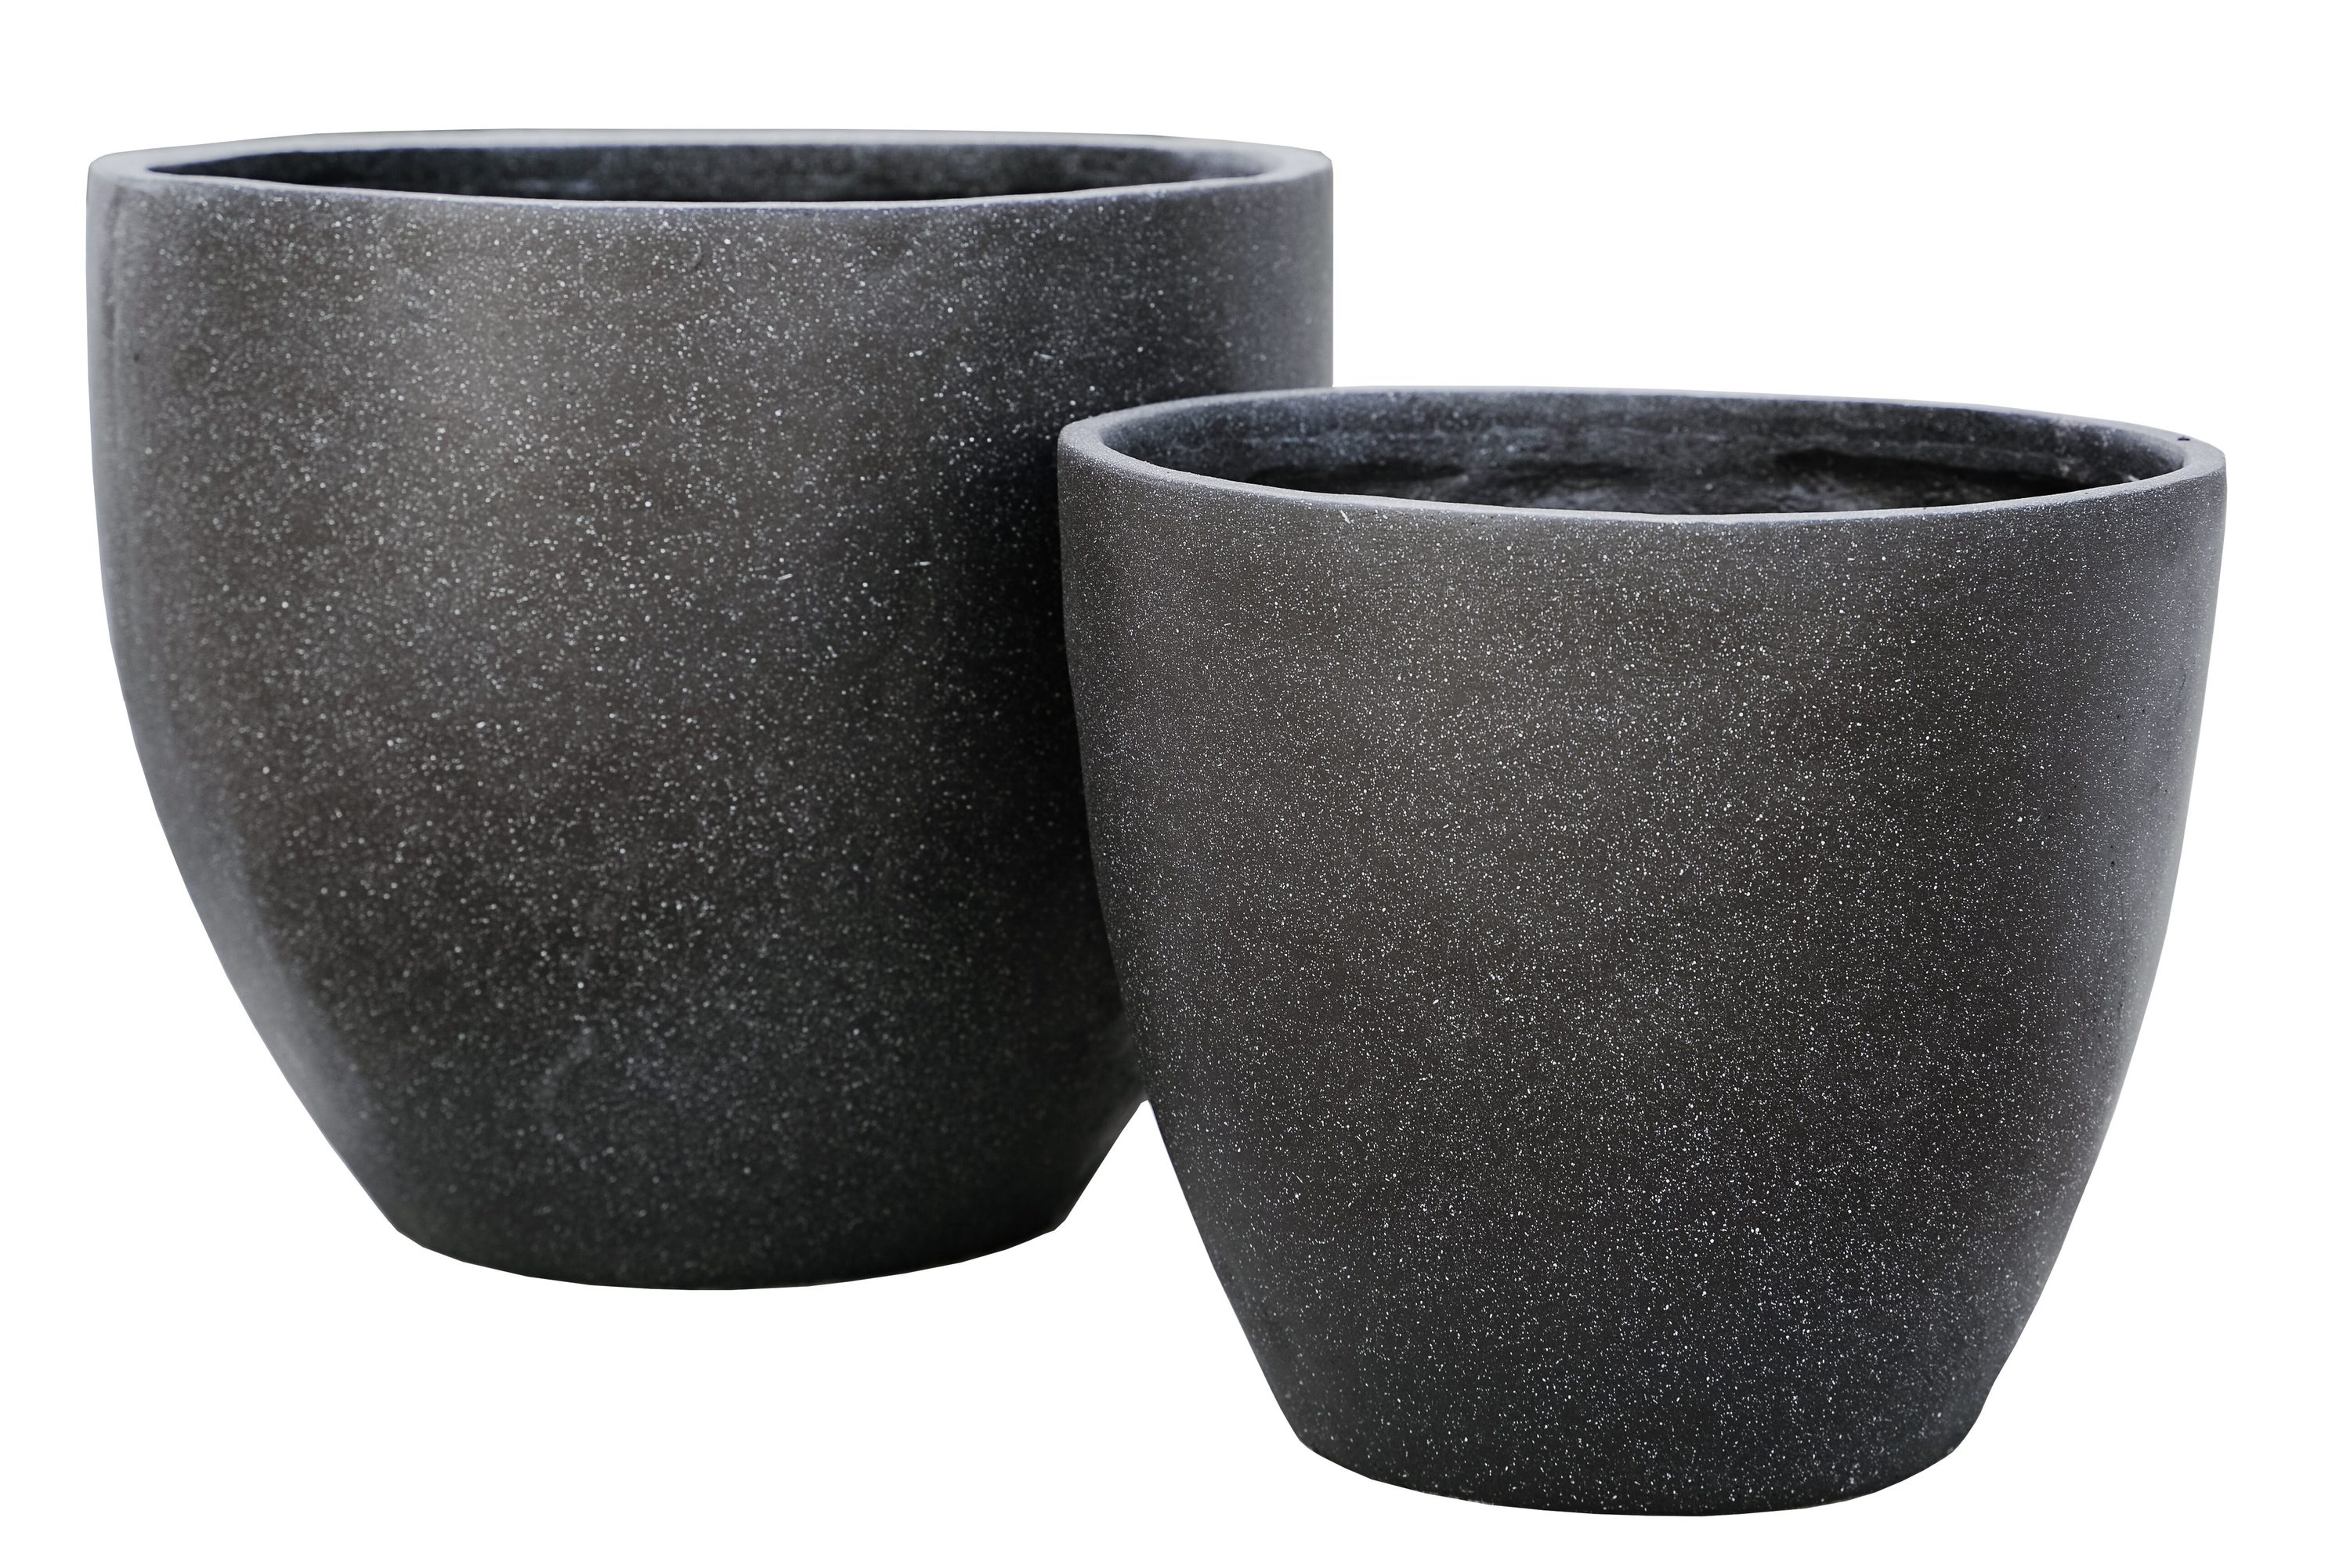 XBrand 2-Pack 16-in W x 14-in H Black Clay Contemporary/Modern  Indoor/Outdoor Planter Lowes.com